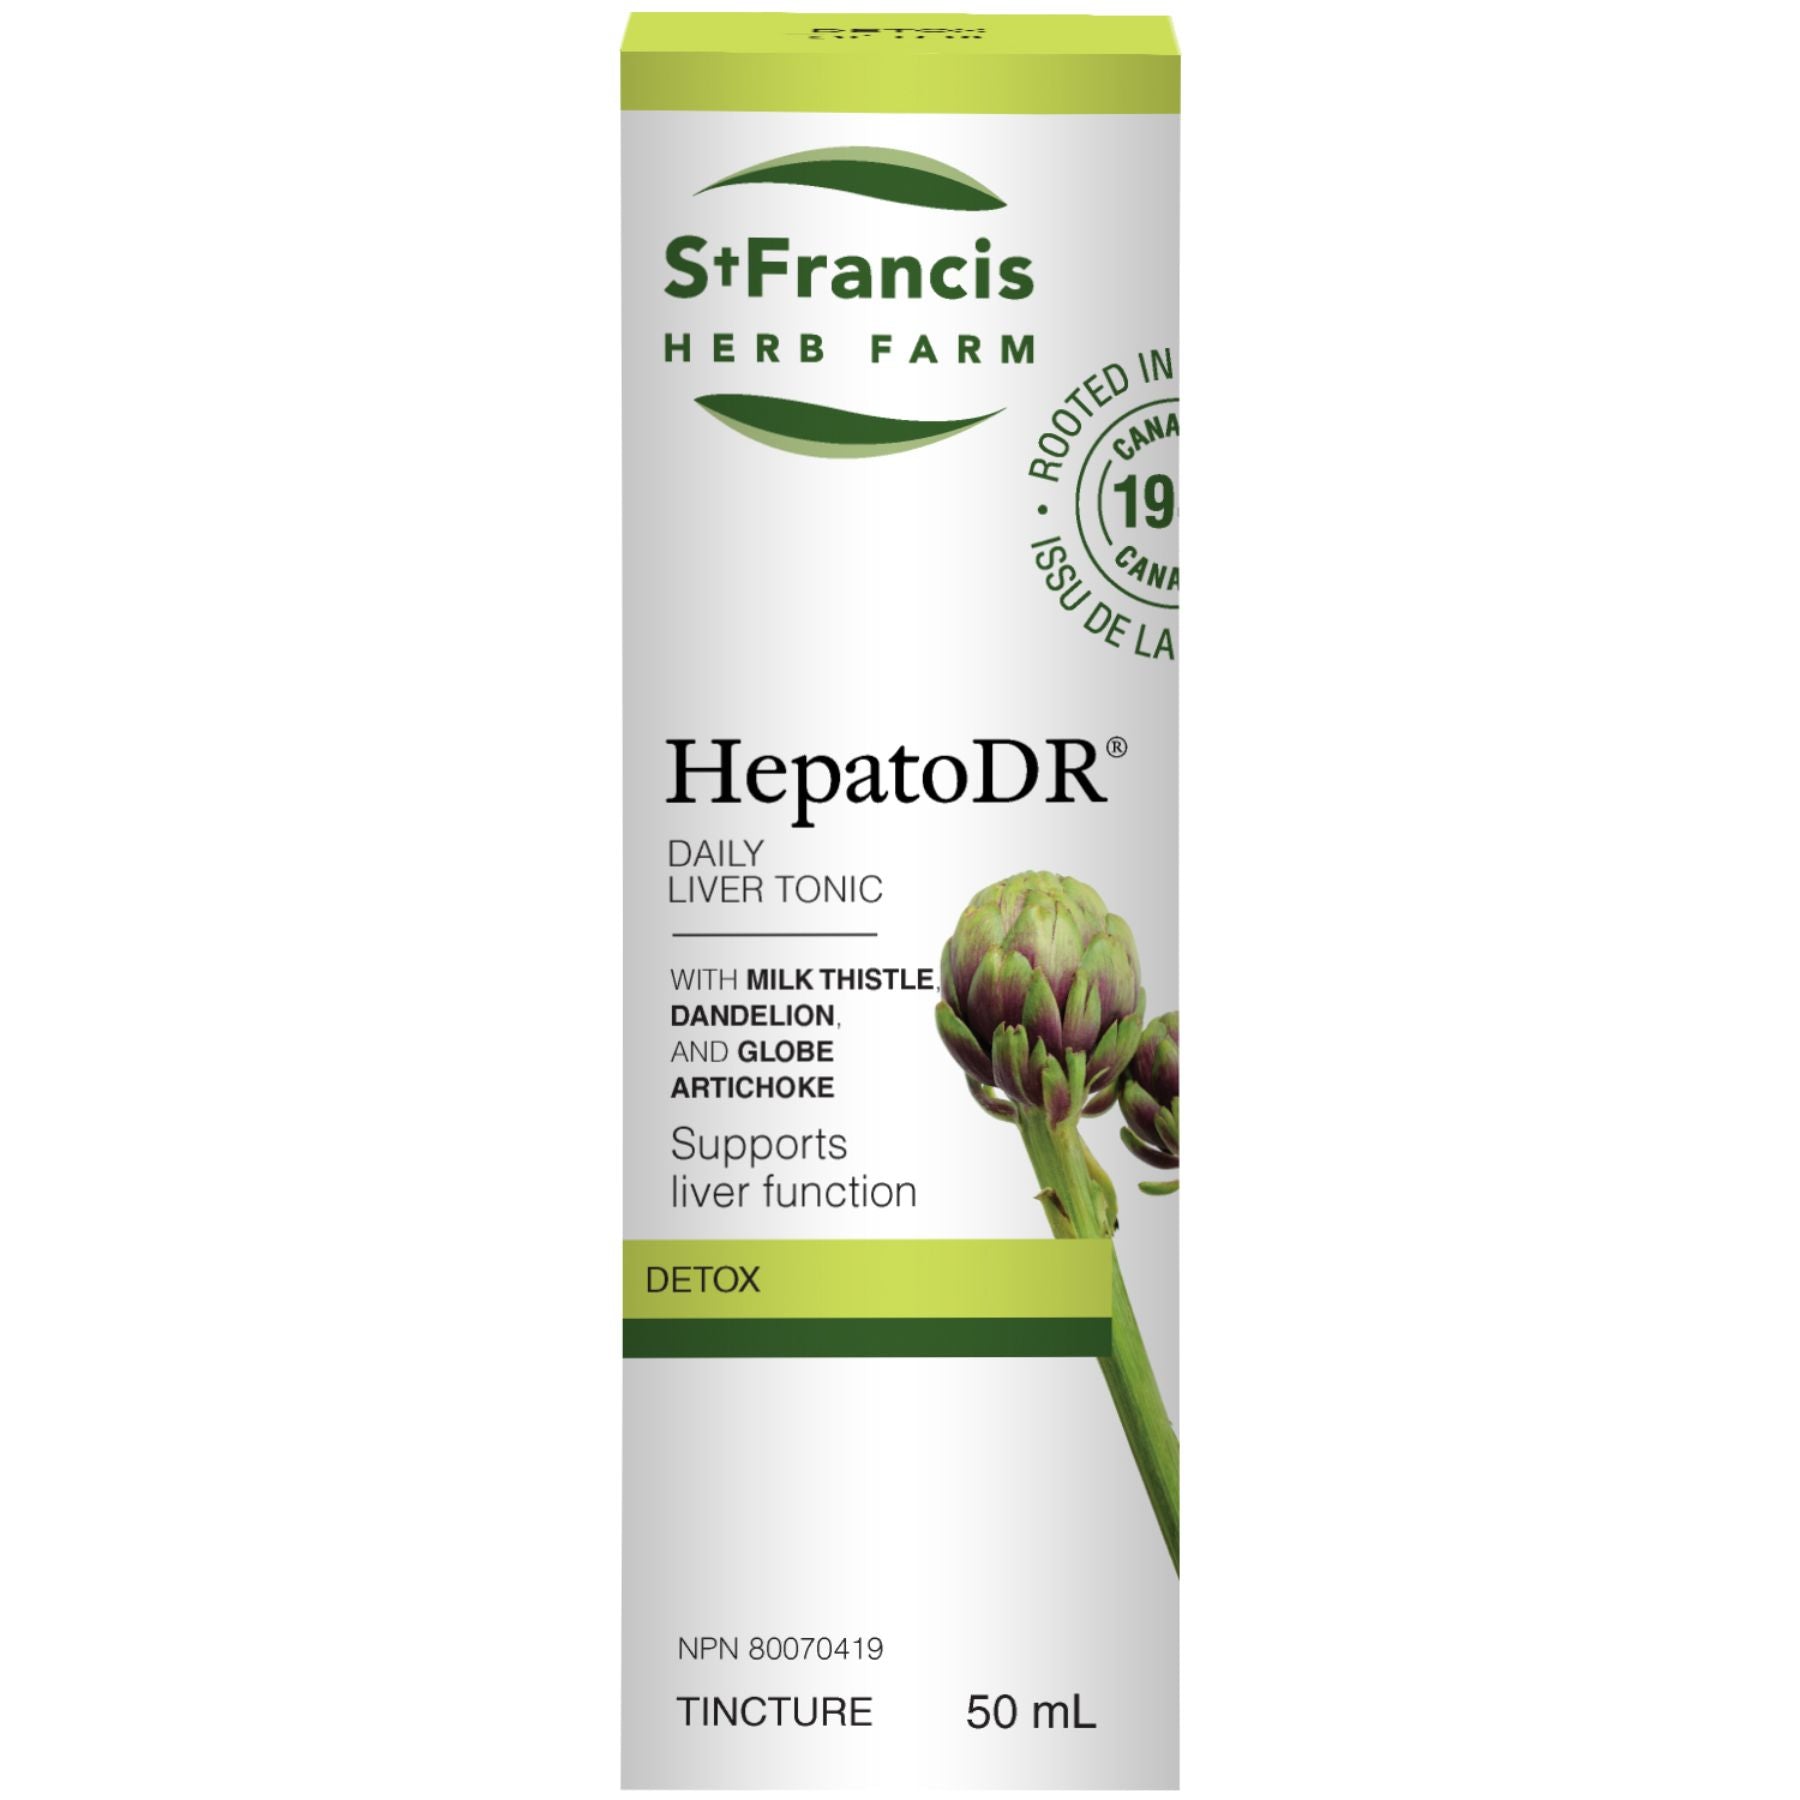 St. Francis Hepato DR 50ml